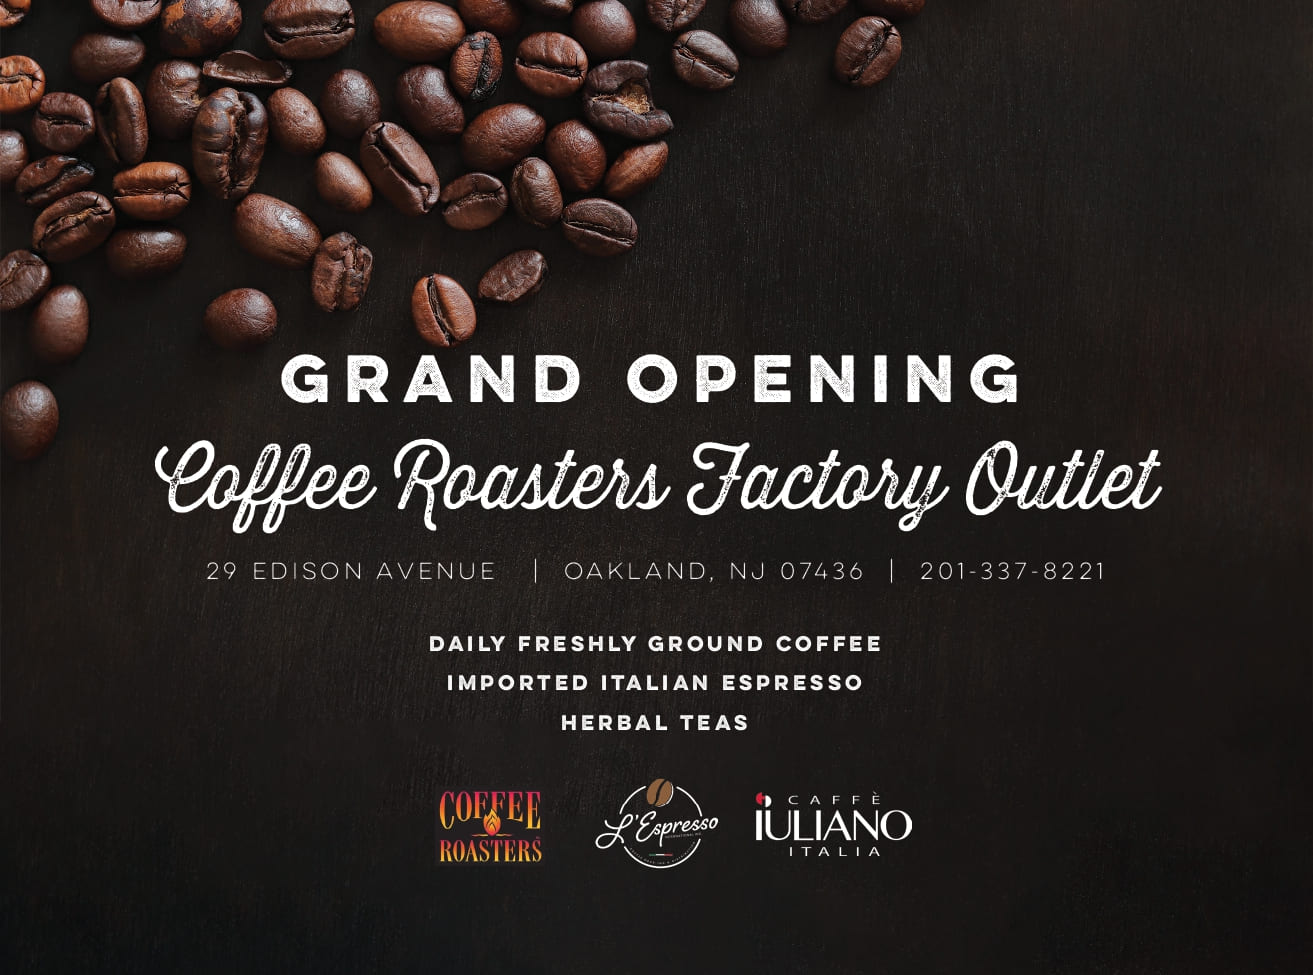 Coffee Roaster Factory Outlet Grand Opening